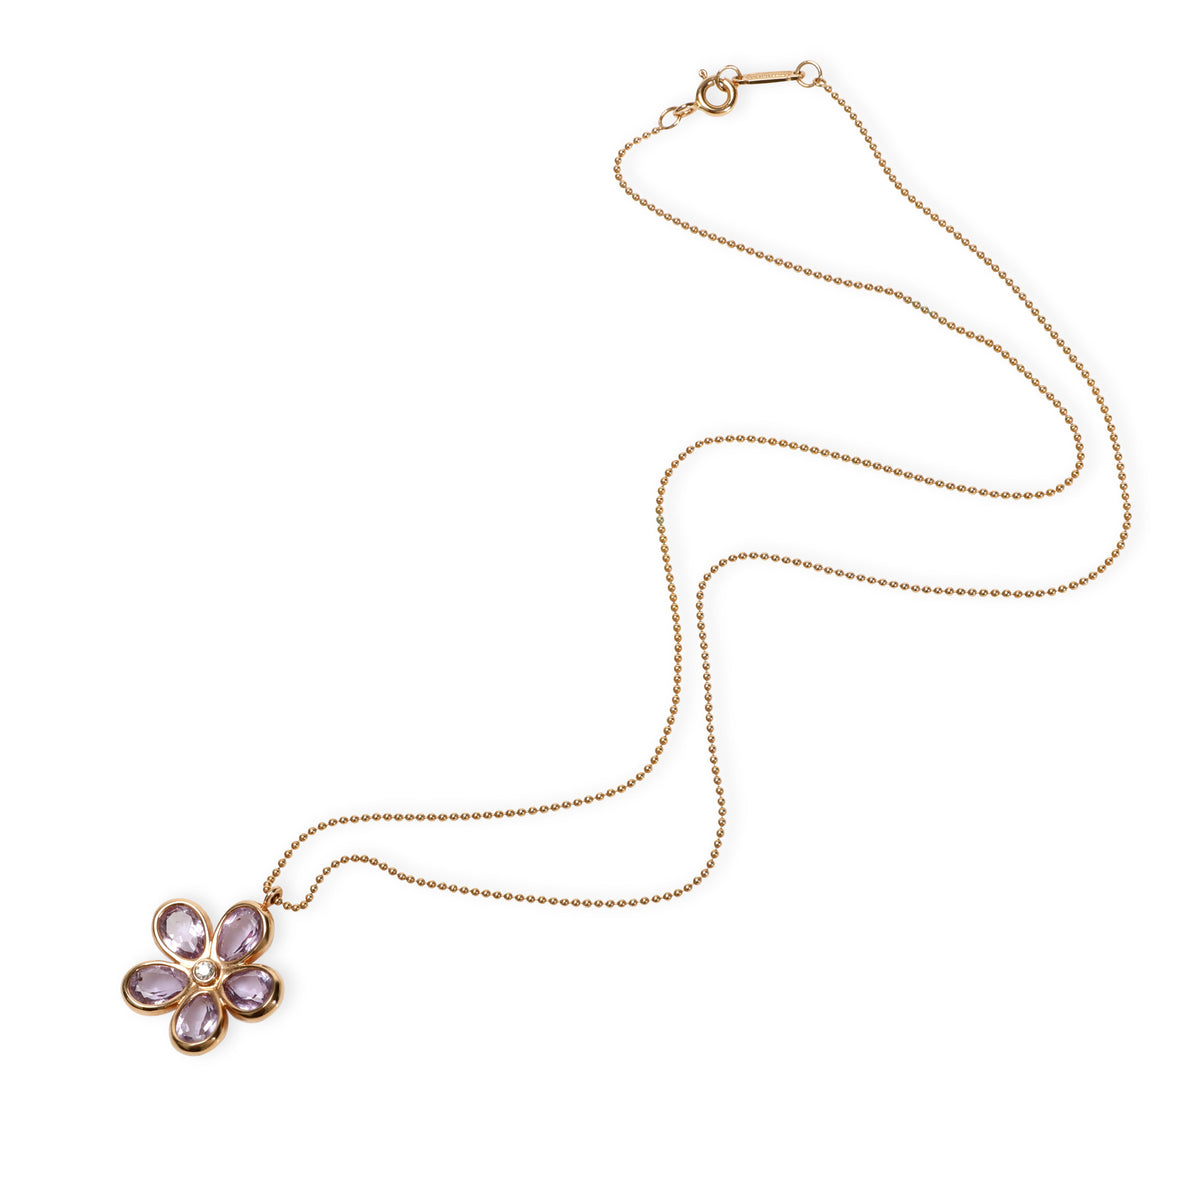 Tiffany & Co. Enchant Diamond Amethyst Necklace in 18K Rose Gold 0.02 CT